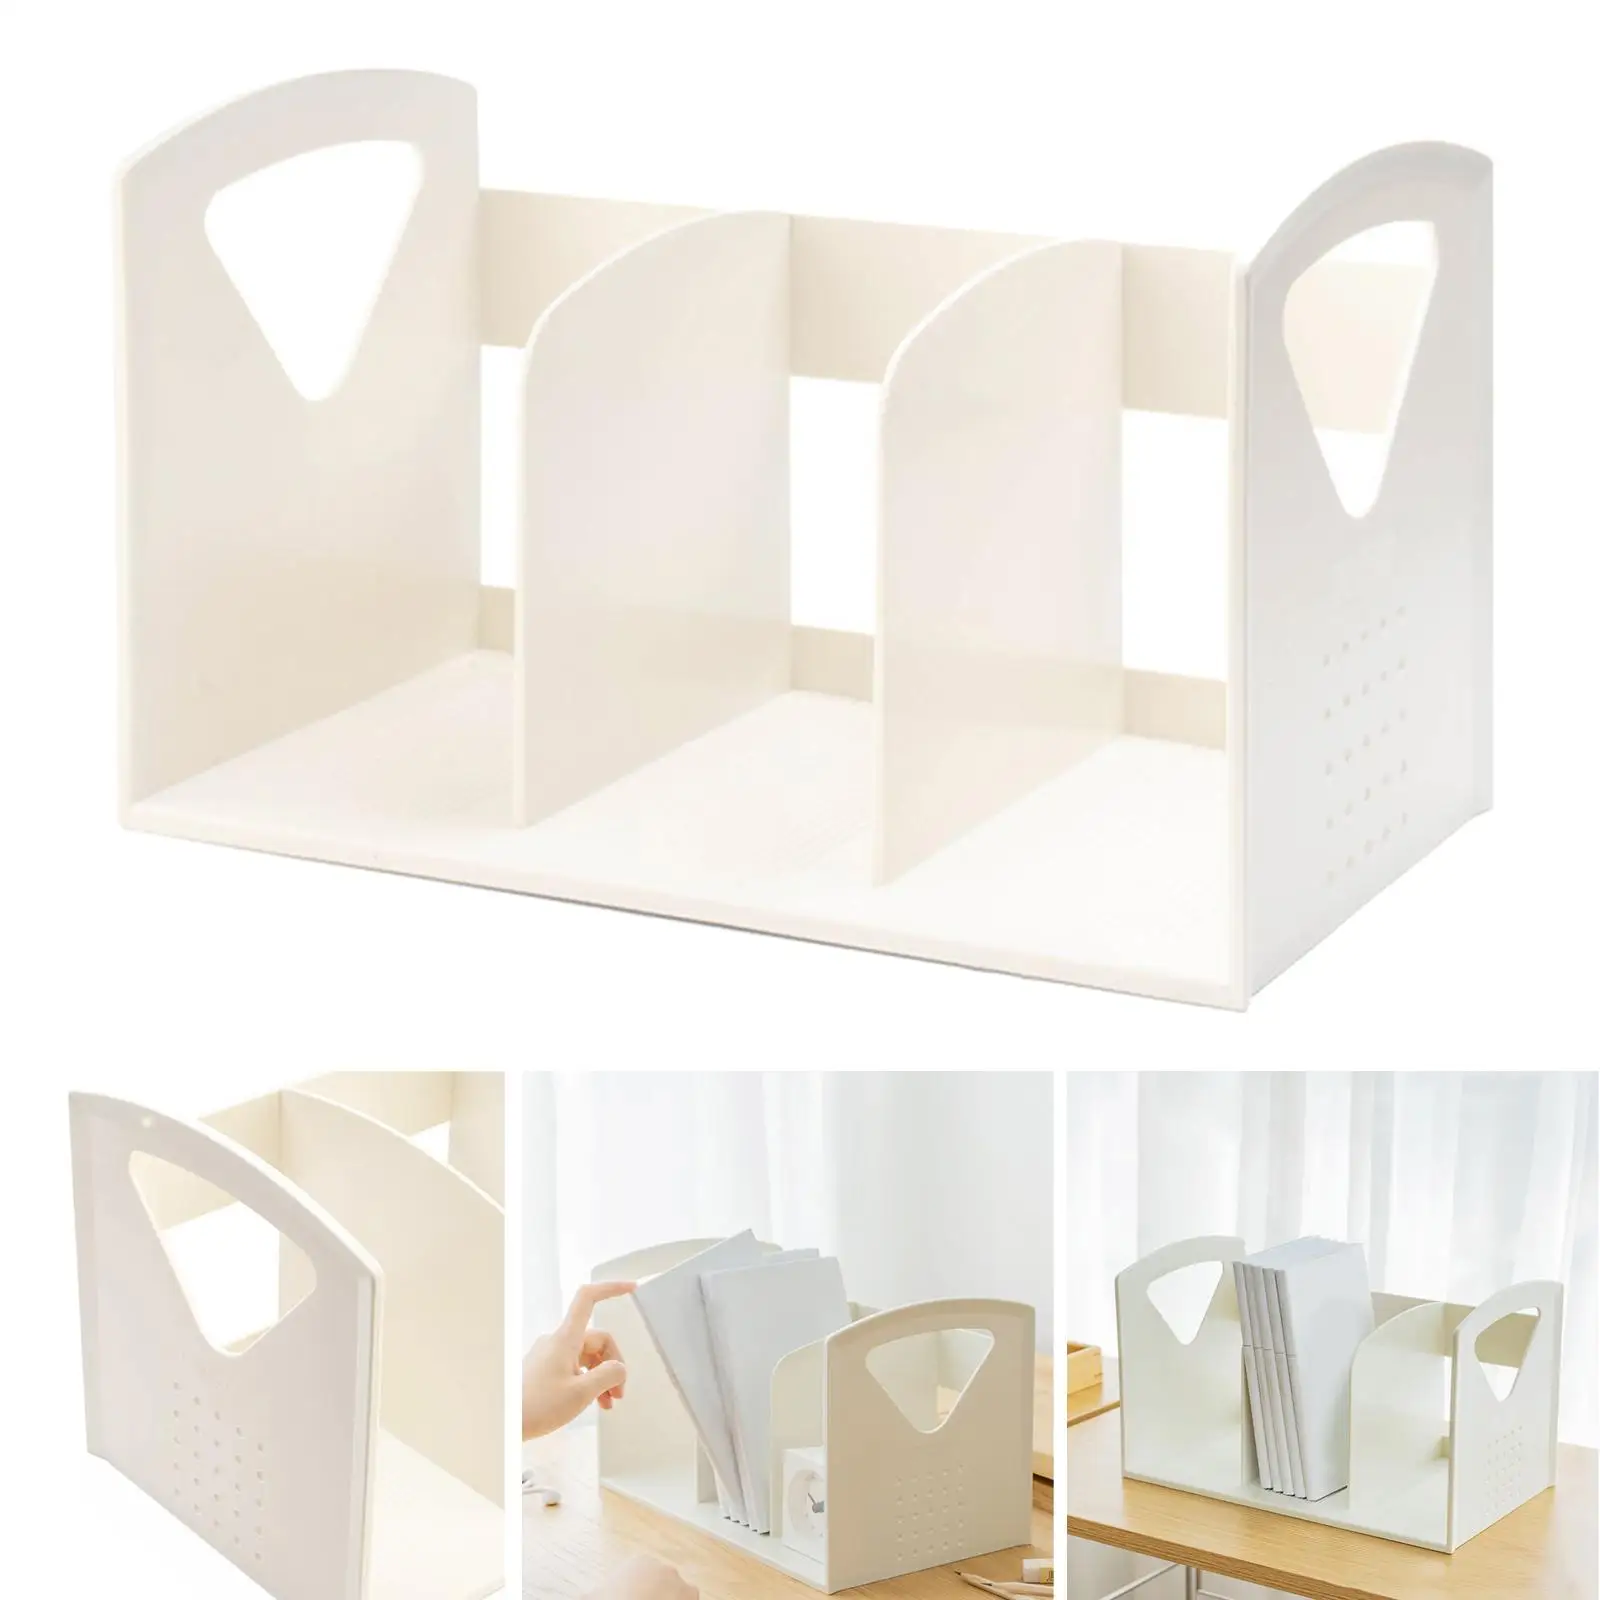 Bookends For Shelves Book Support Stand Bookshelf With 3 Compartments Holder Desk Organizer Office Accessories